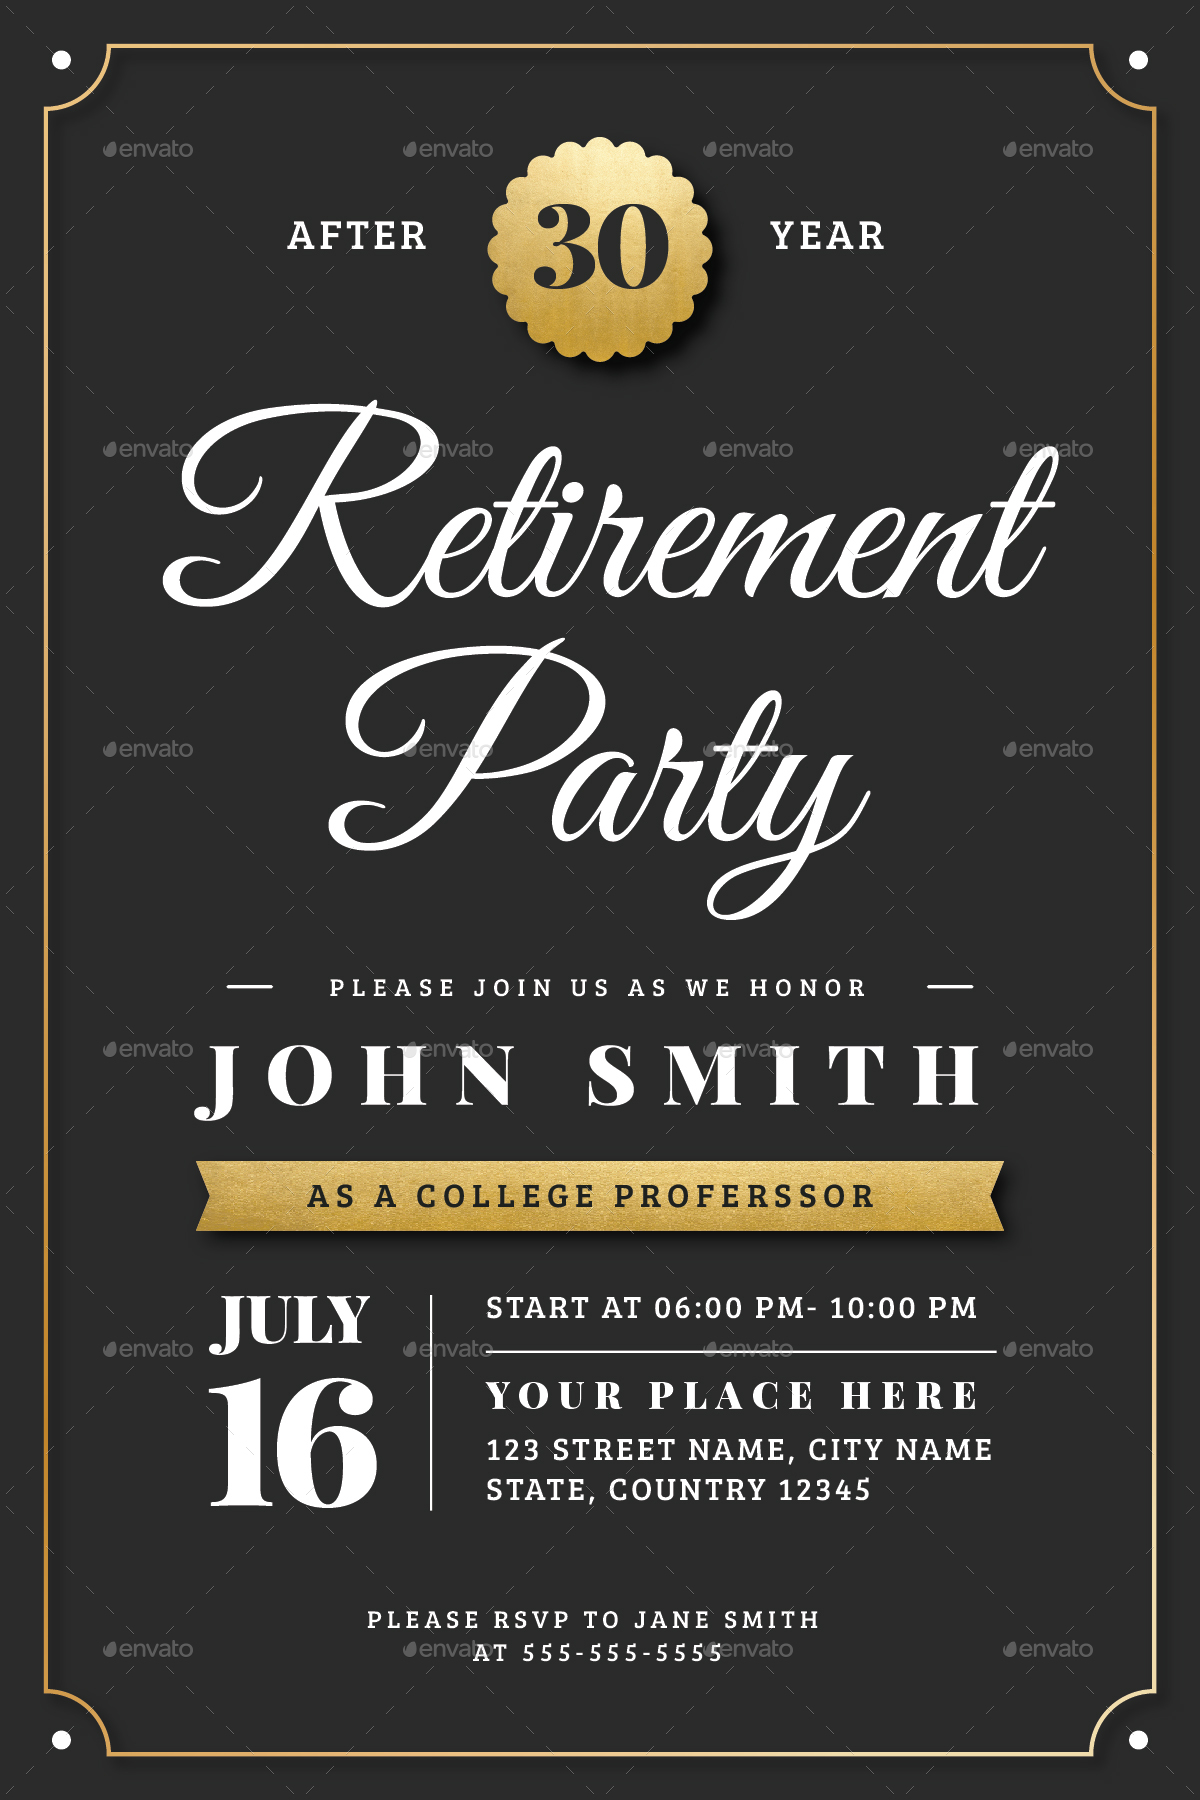 Gold Retirement Invitation Flyer Templates by Vector Vactory GraphicRiver